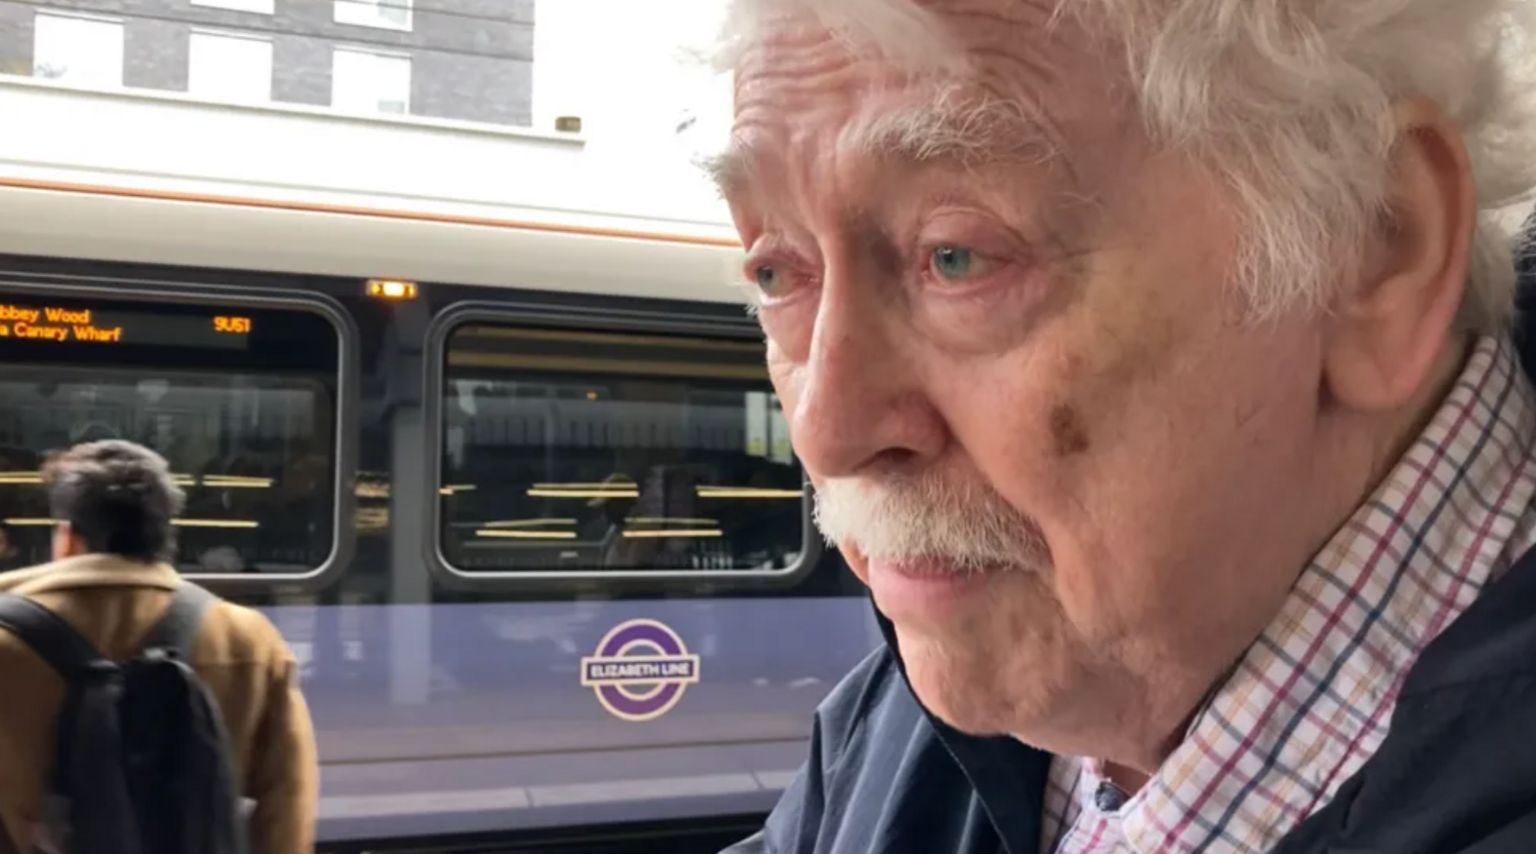 Eric Leach is standing on a train platform in front of an Elizabeth Line Tube train. He has a moustache and a checked shirt